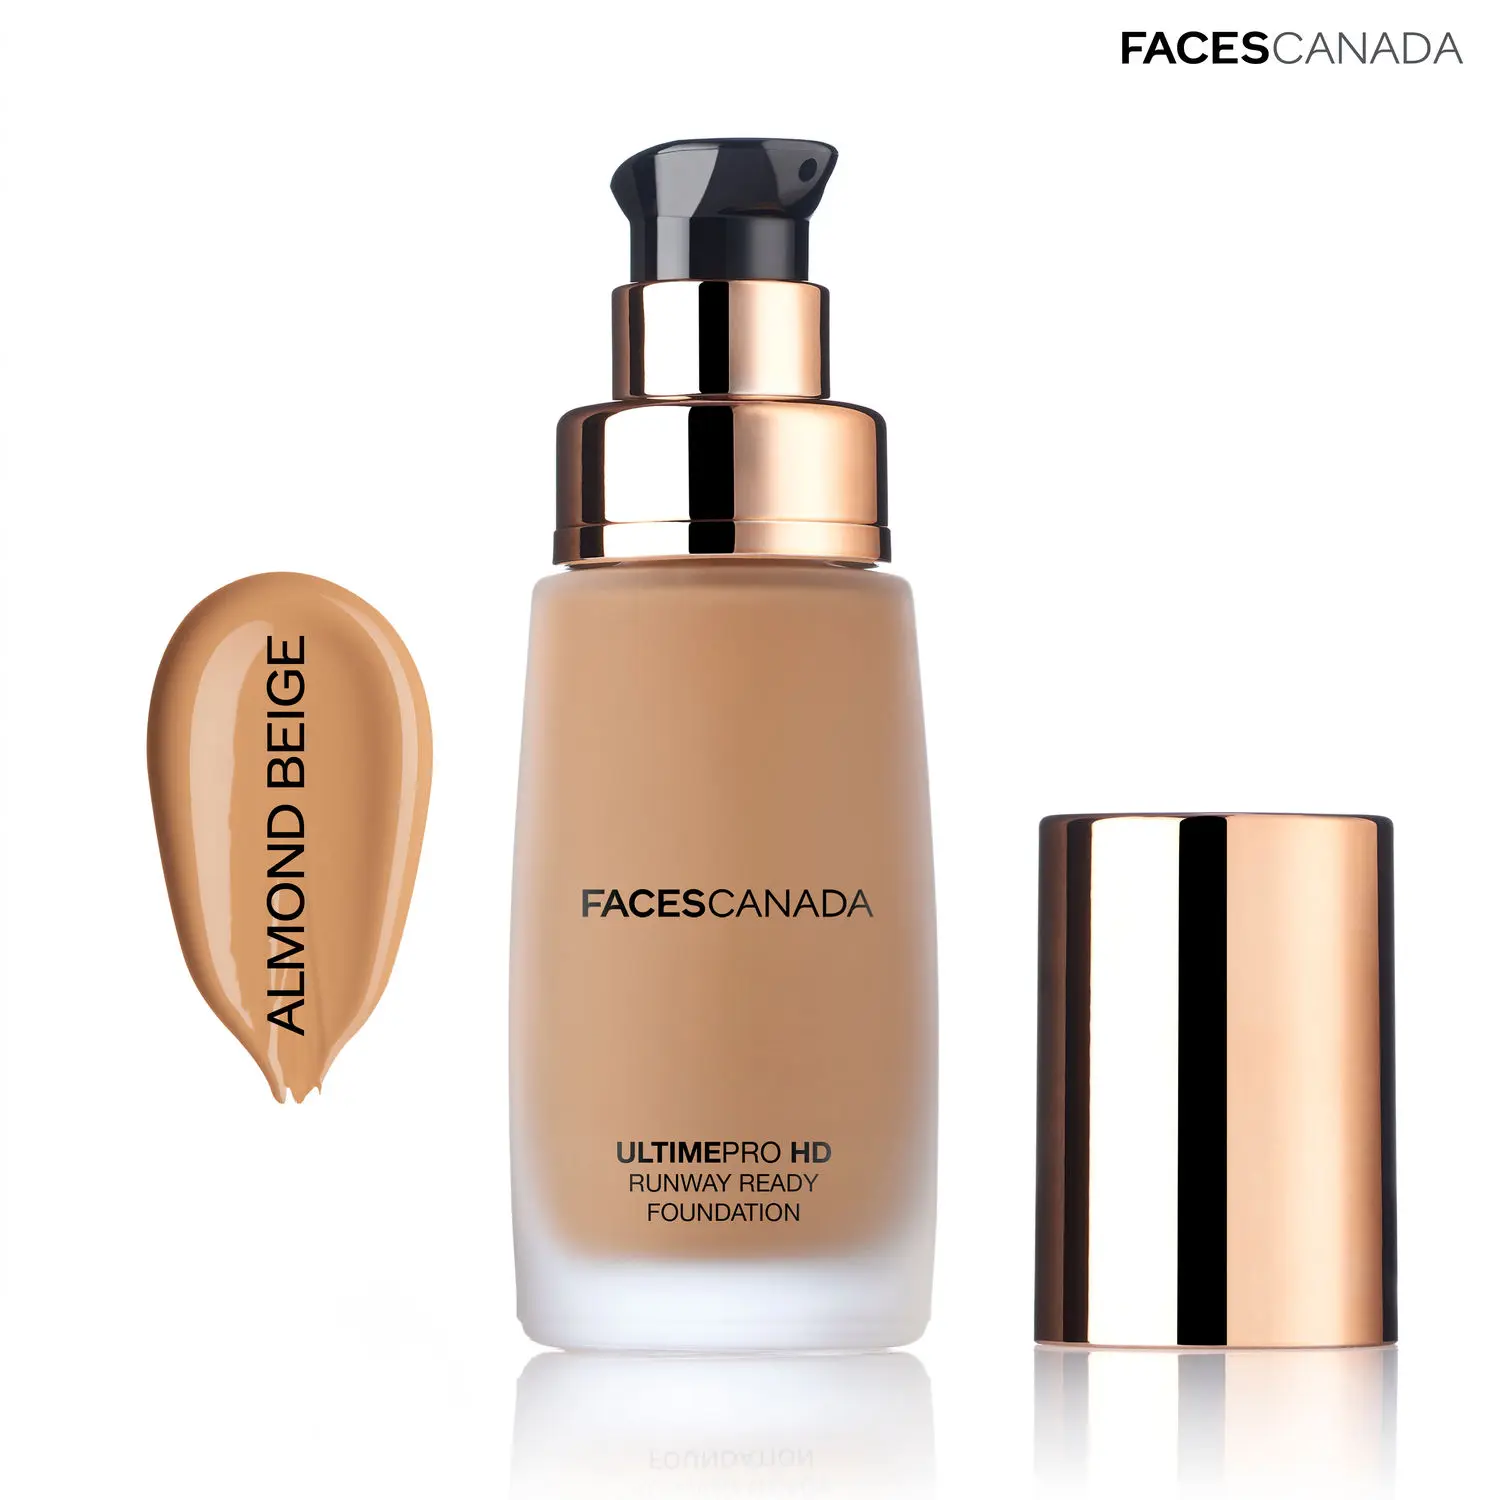 Faces Canada Ultime Pro HD Runway Ready Foundation - Almond Beige 06 (30 ml)